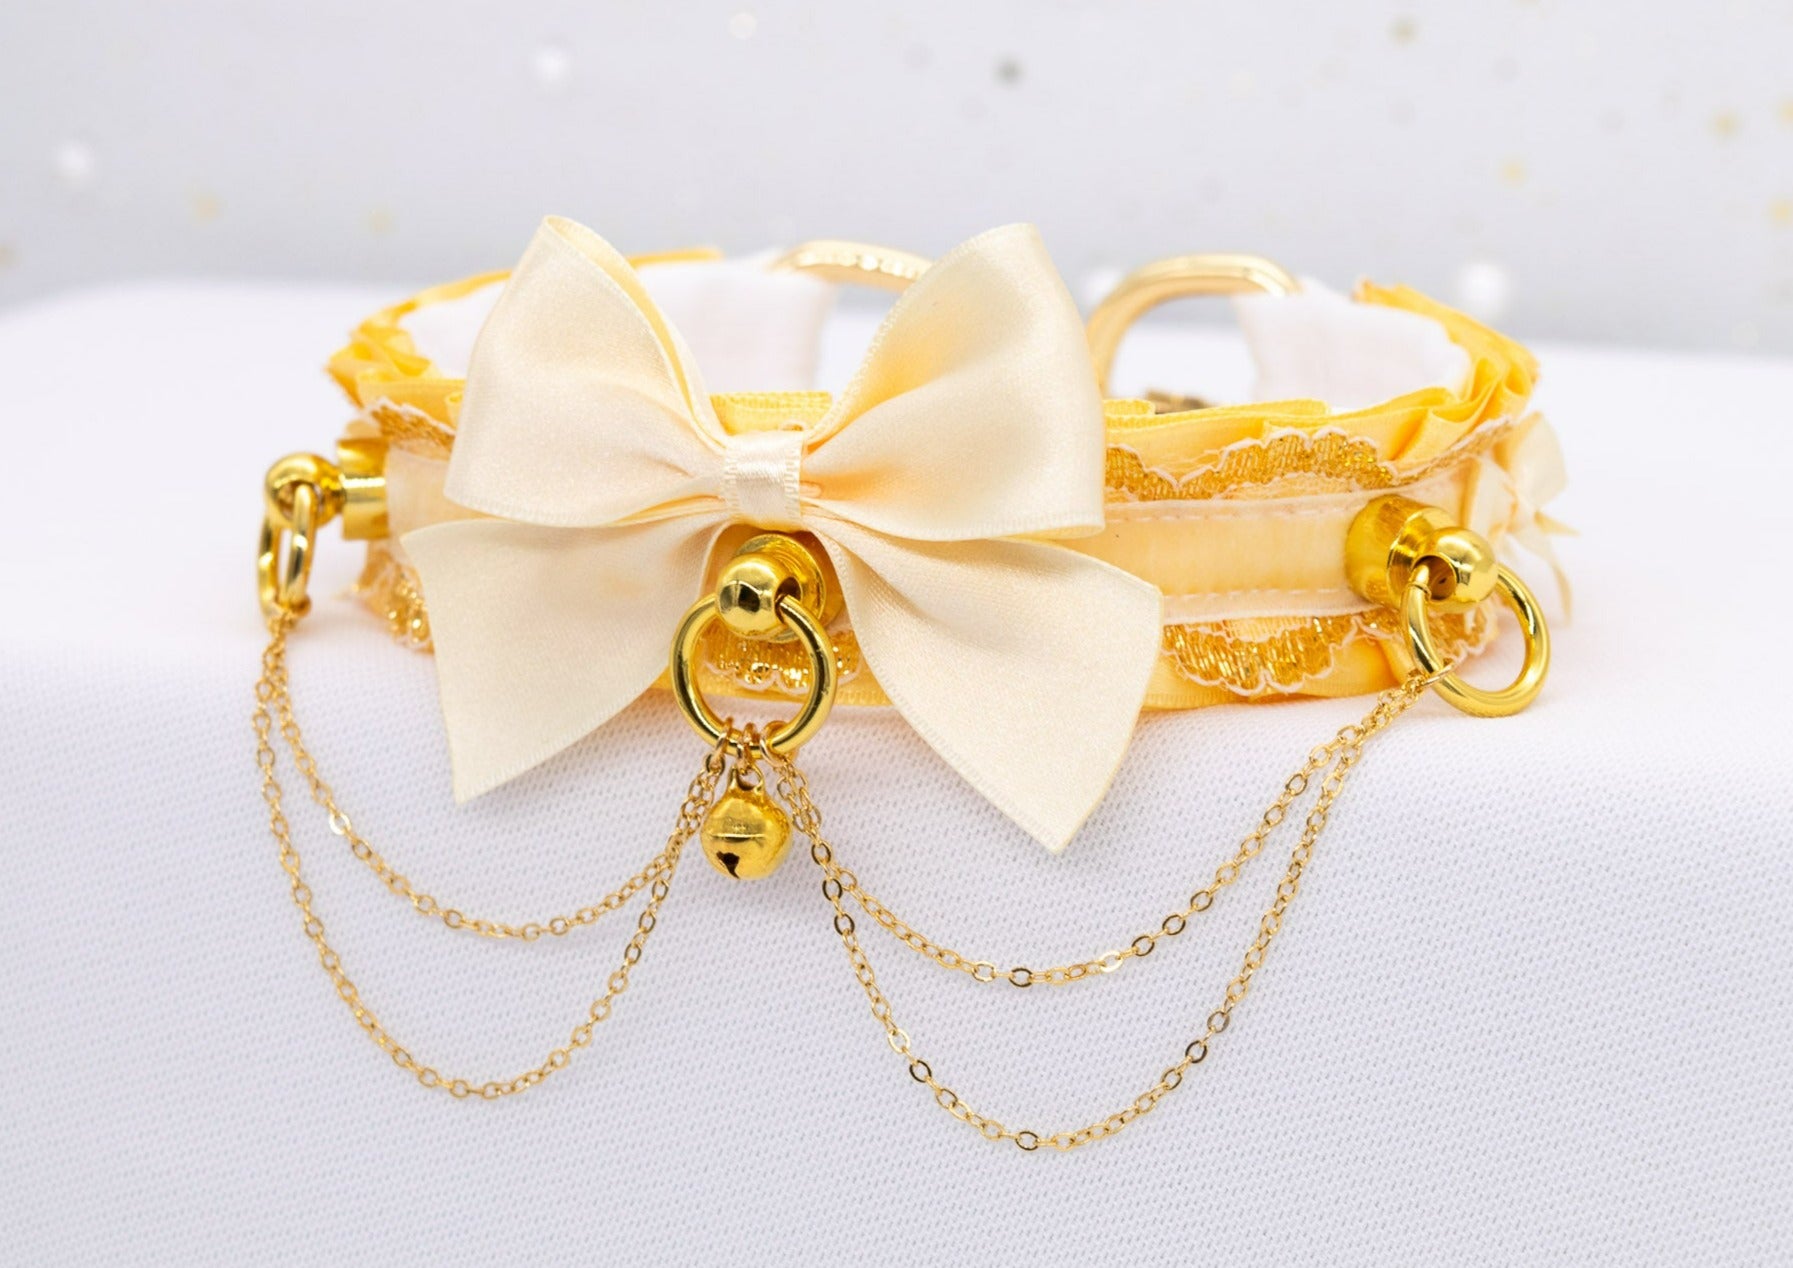 Buttercup Yellow & Ivory Chained Luxury Pet Play Collar in Gold